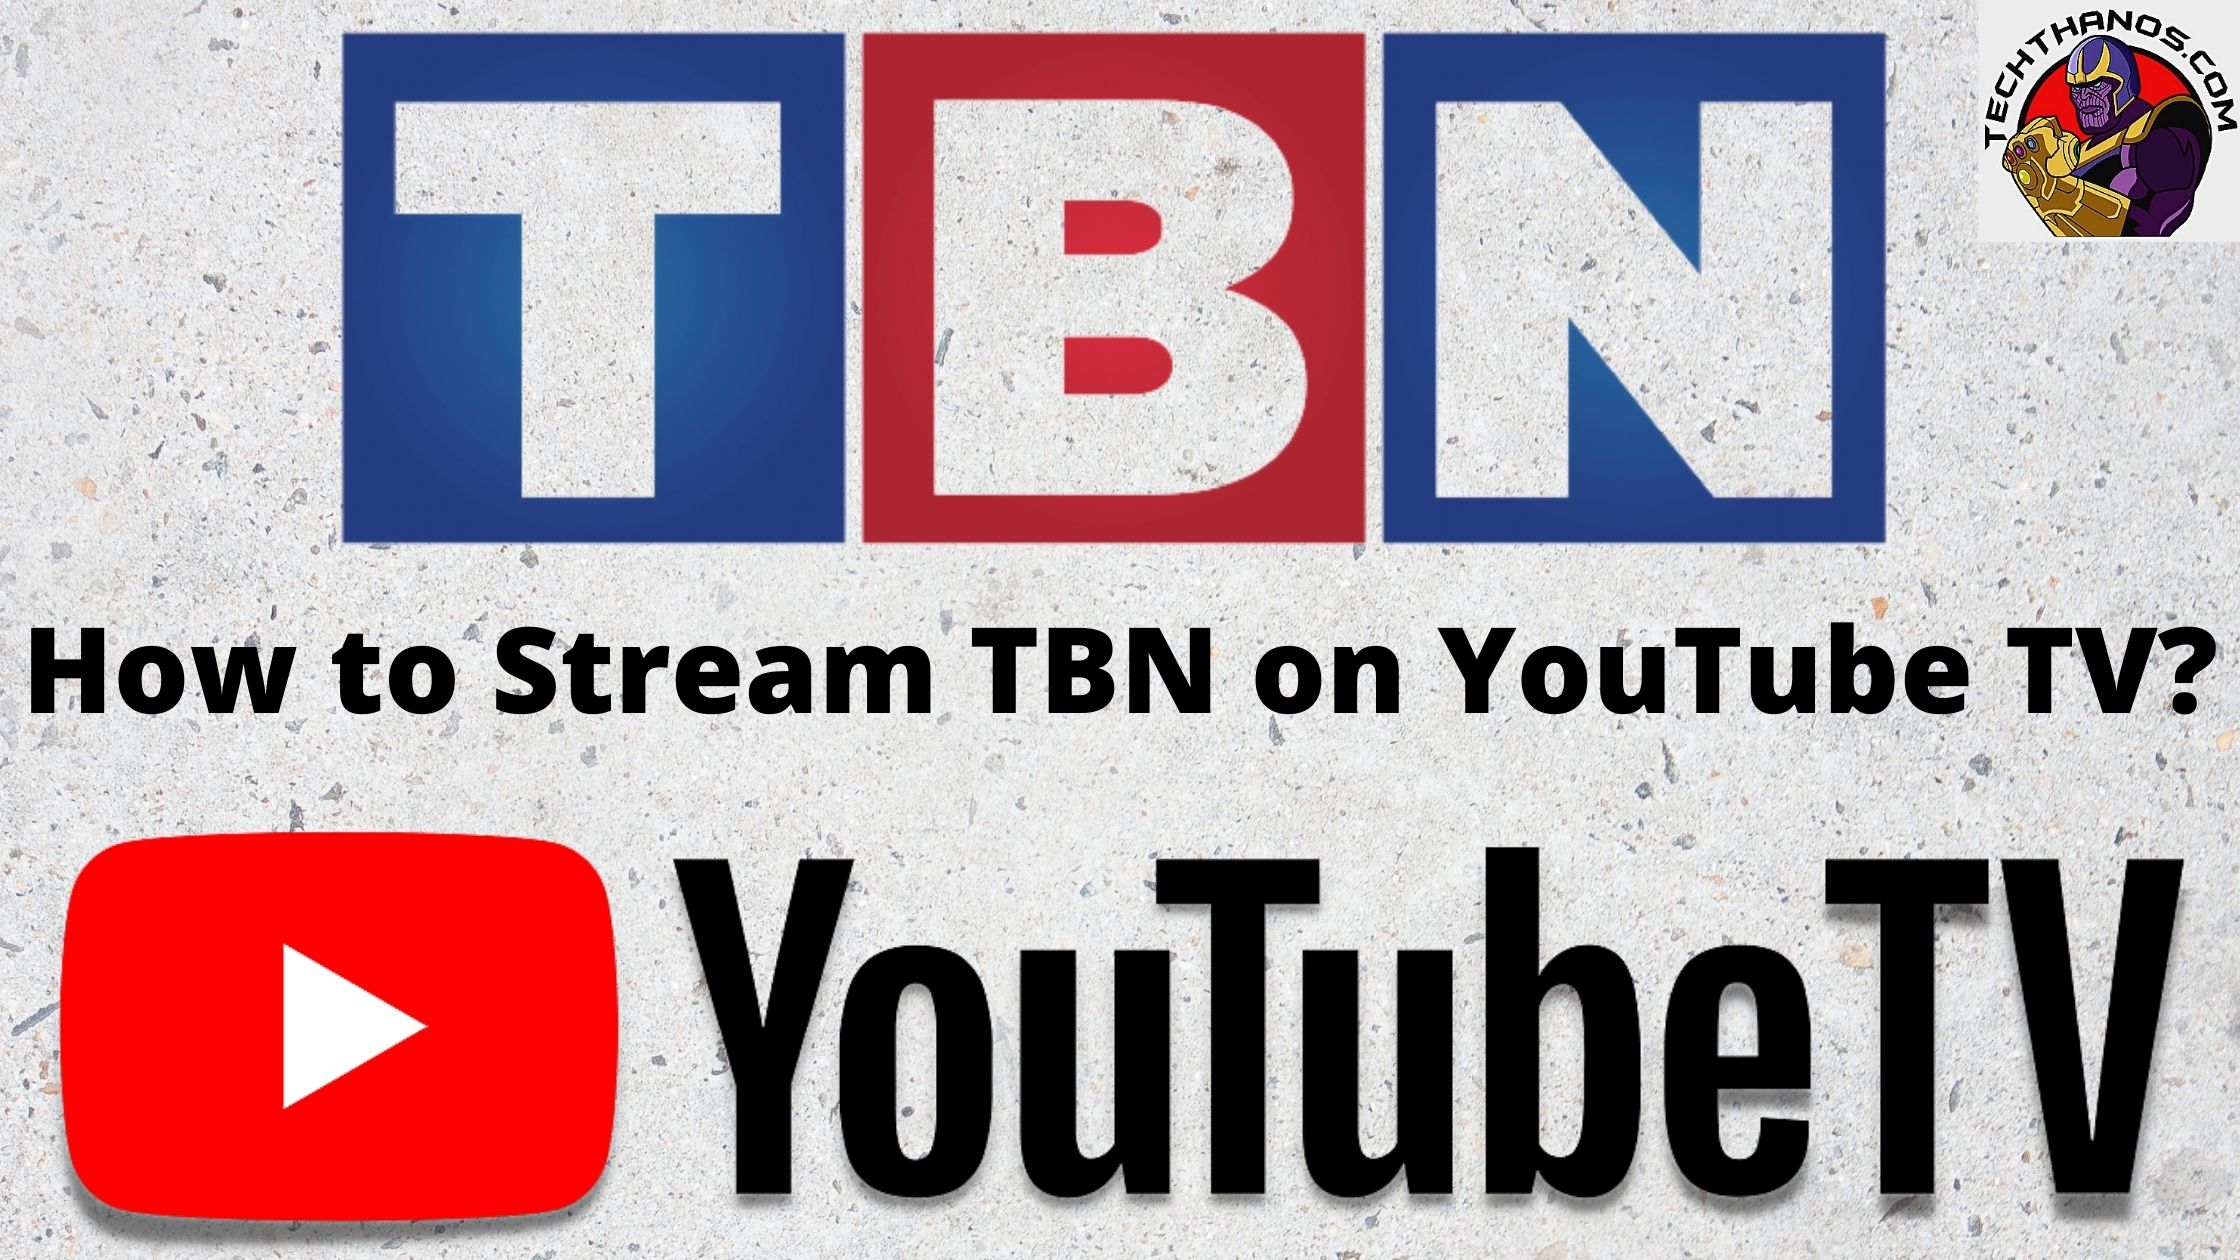 How to Install and Stream TBN on YouTube TV